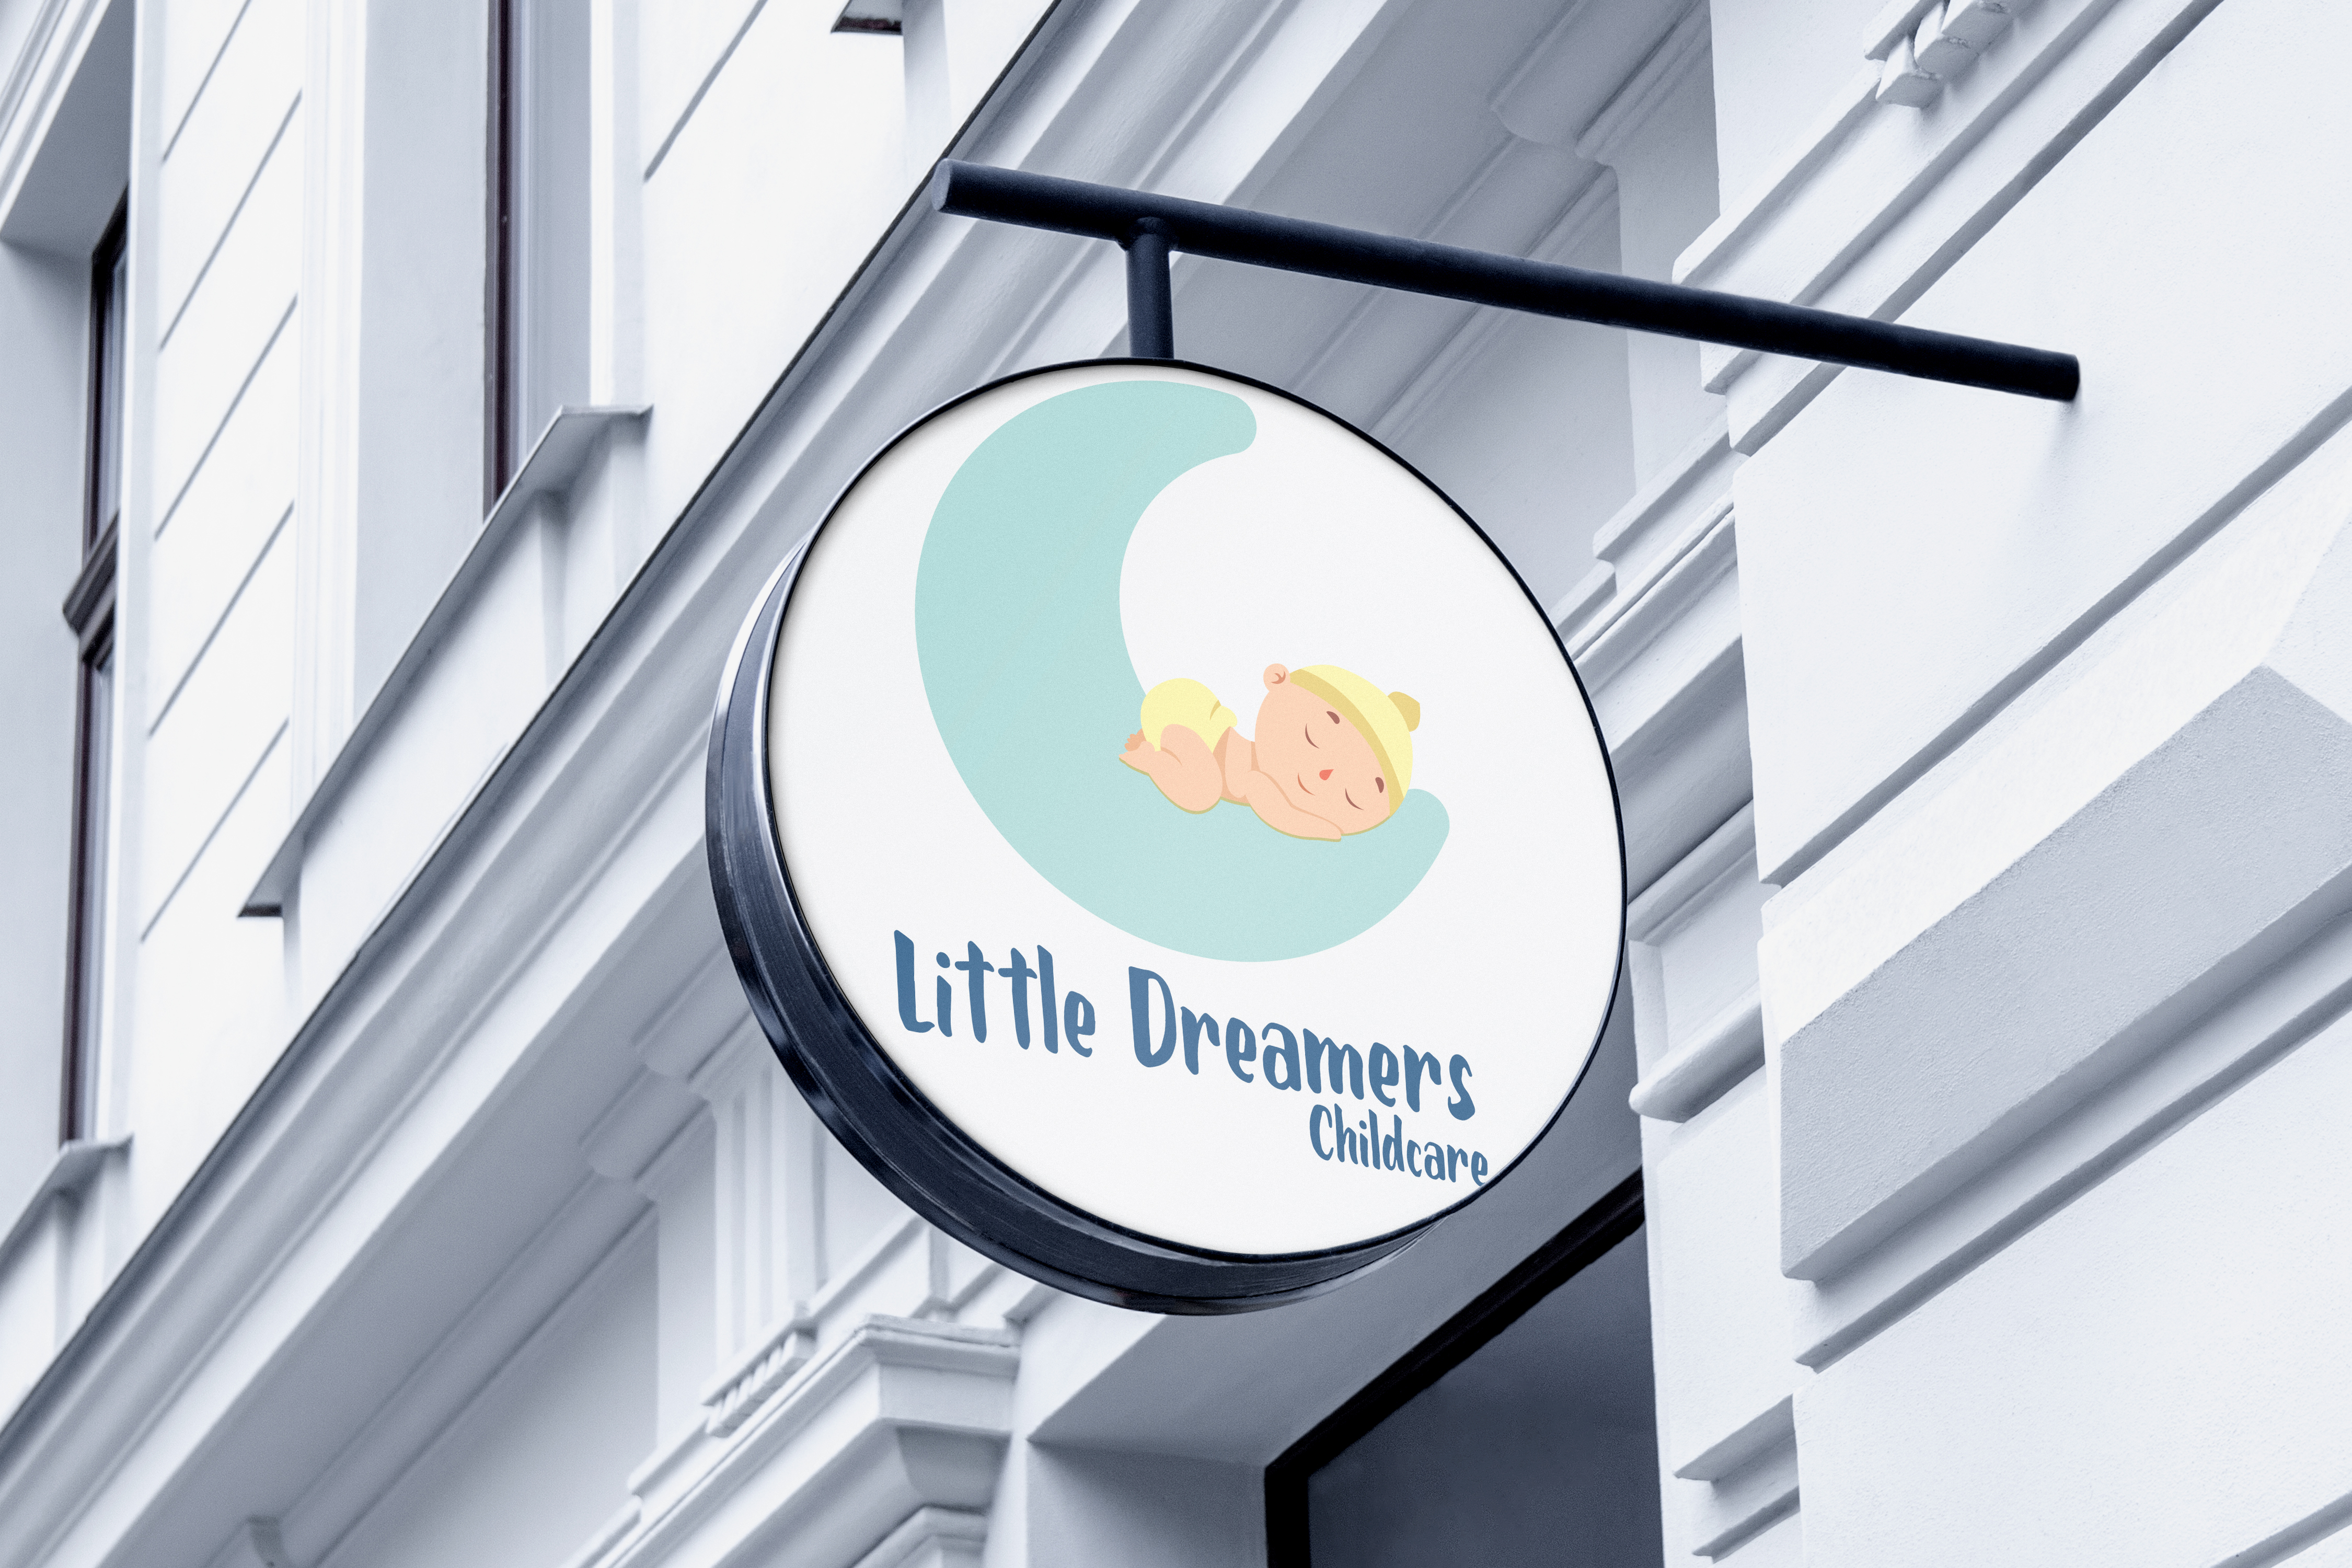 Little Dreamers Childcare